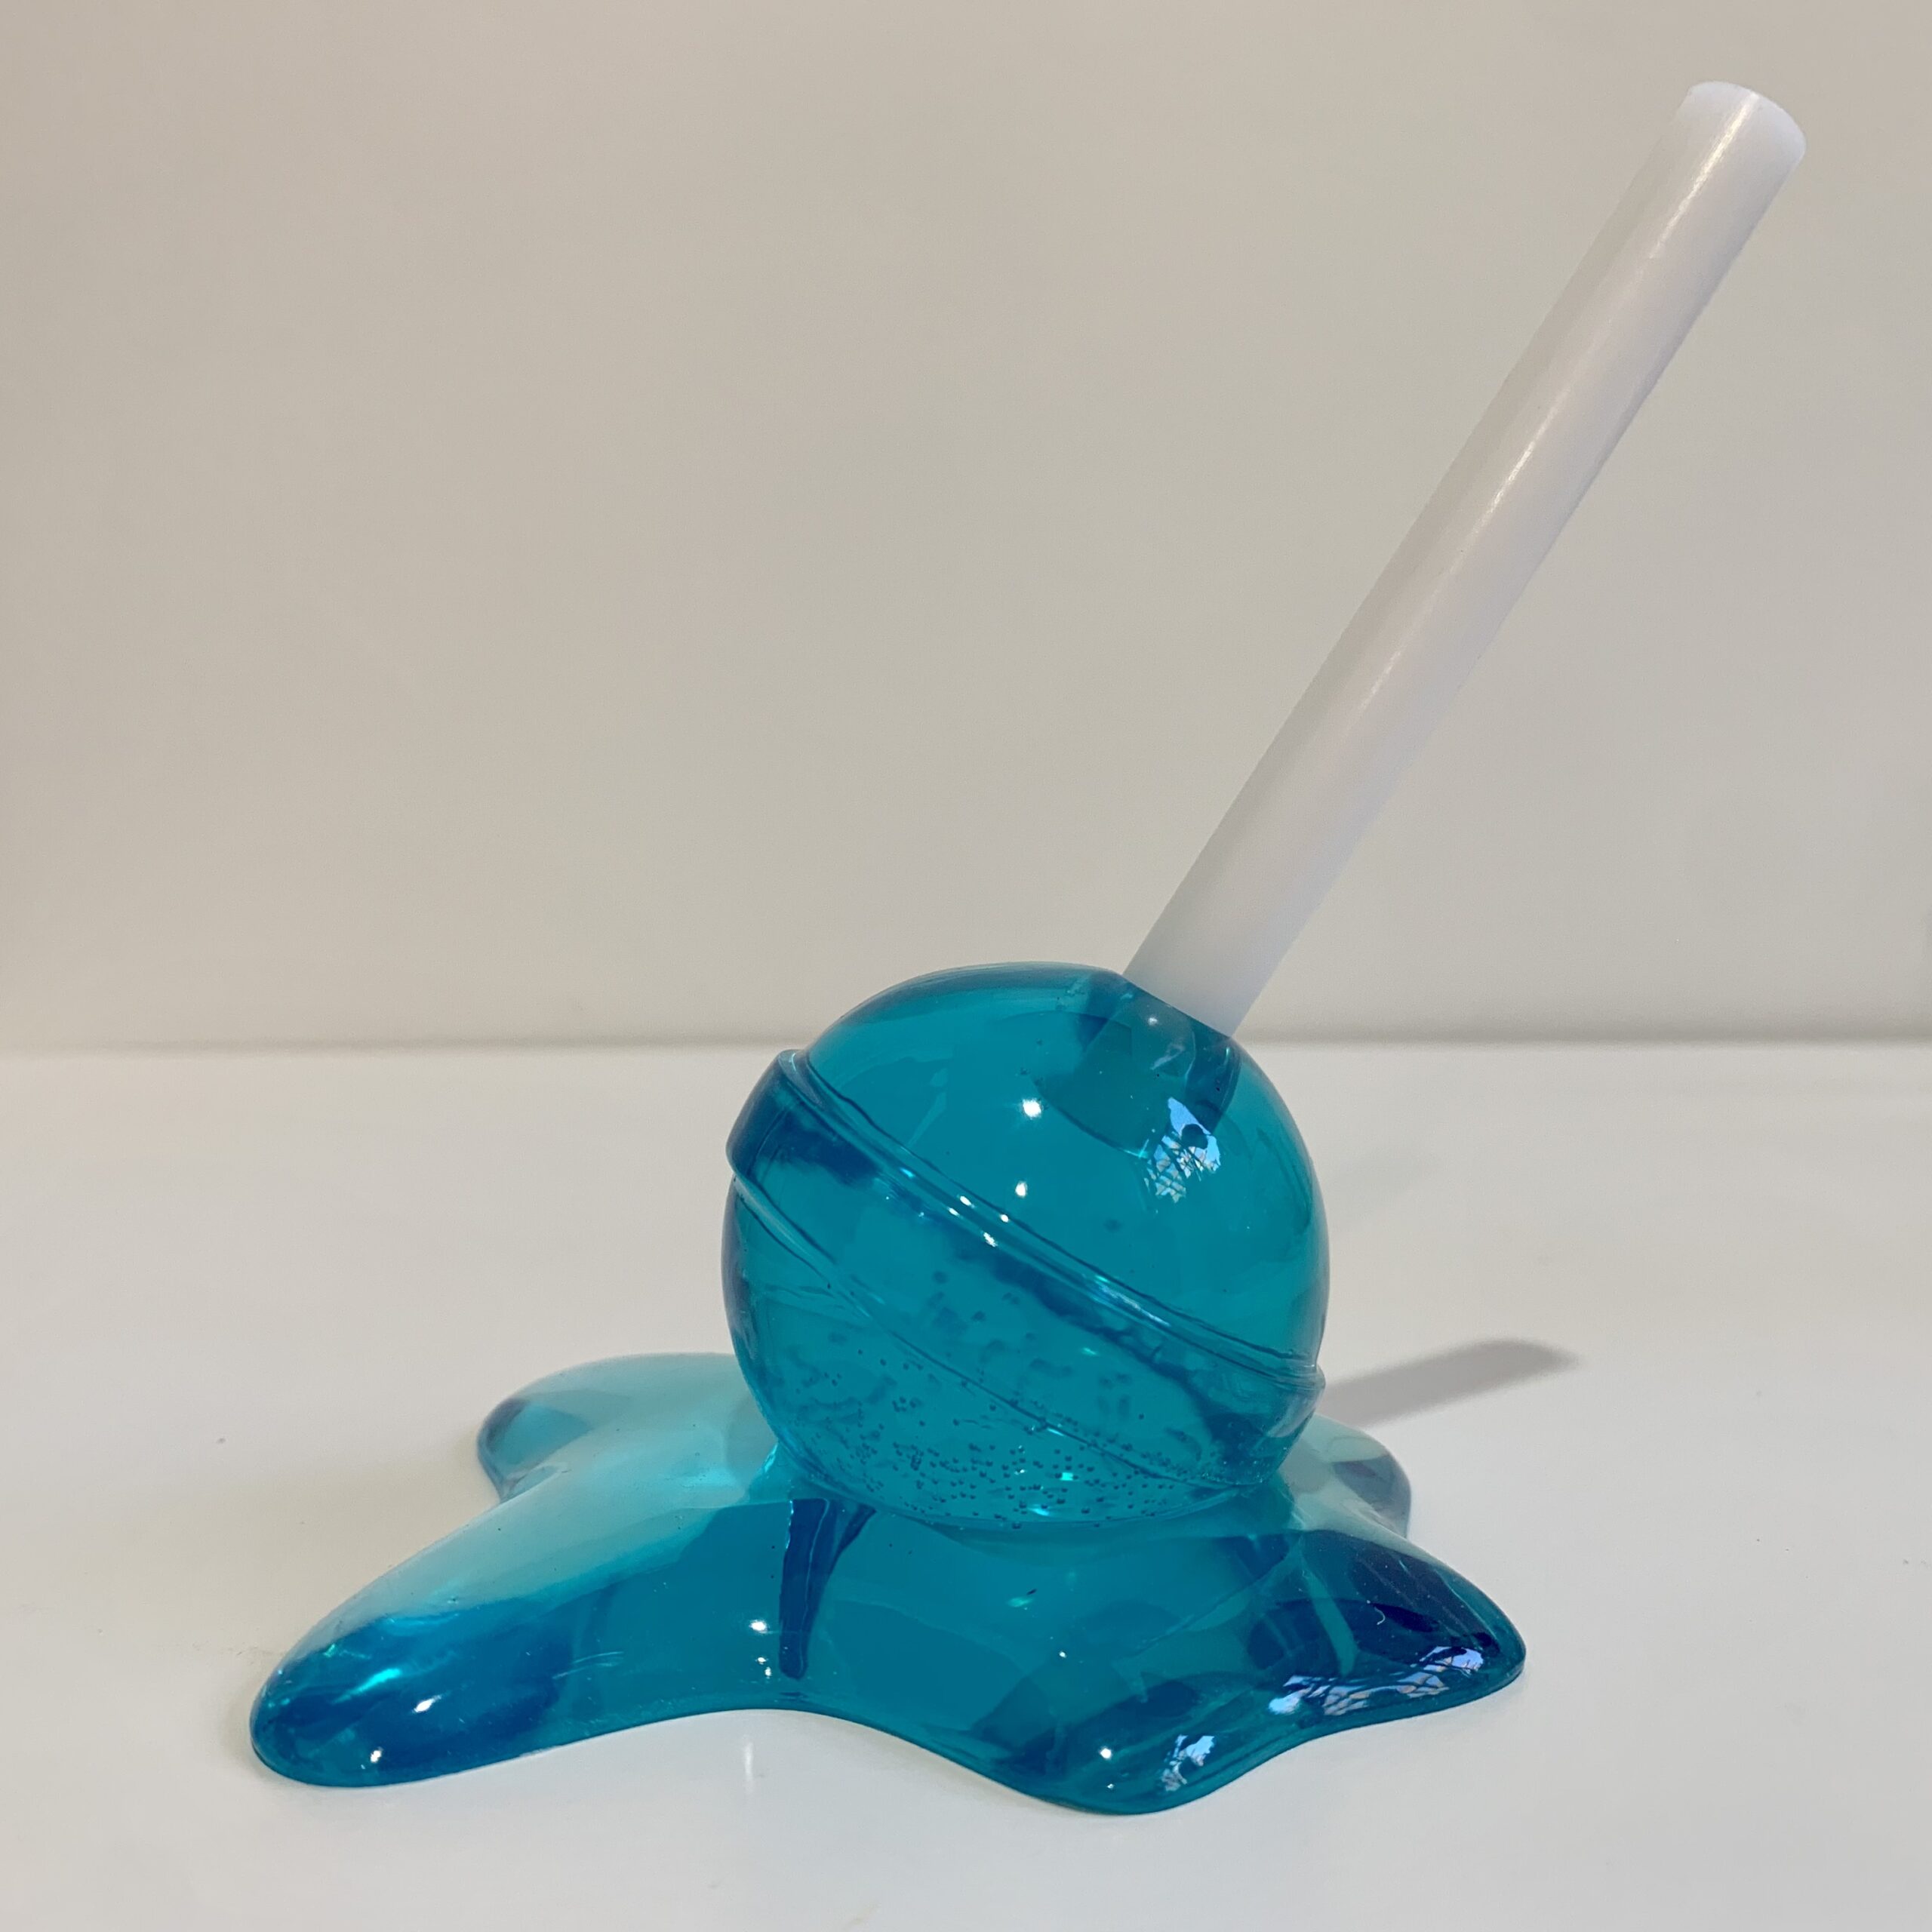 Resin Lollypop Sculpture Turquoise